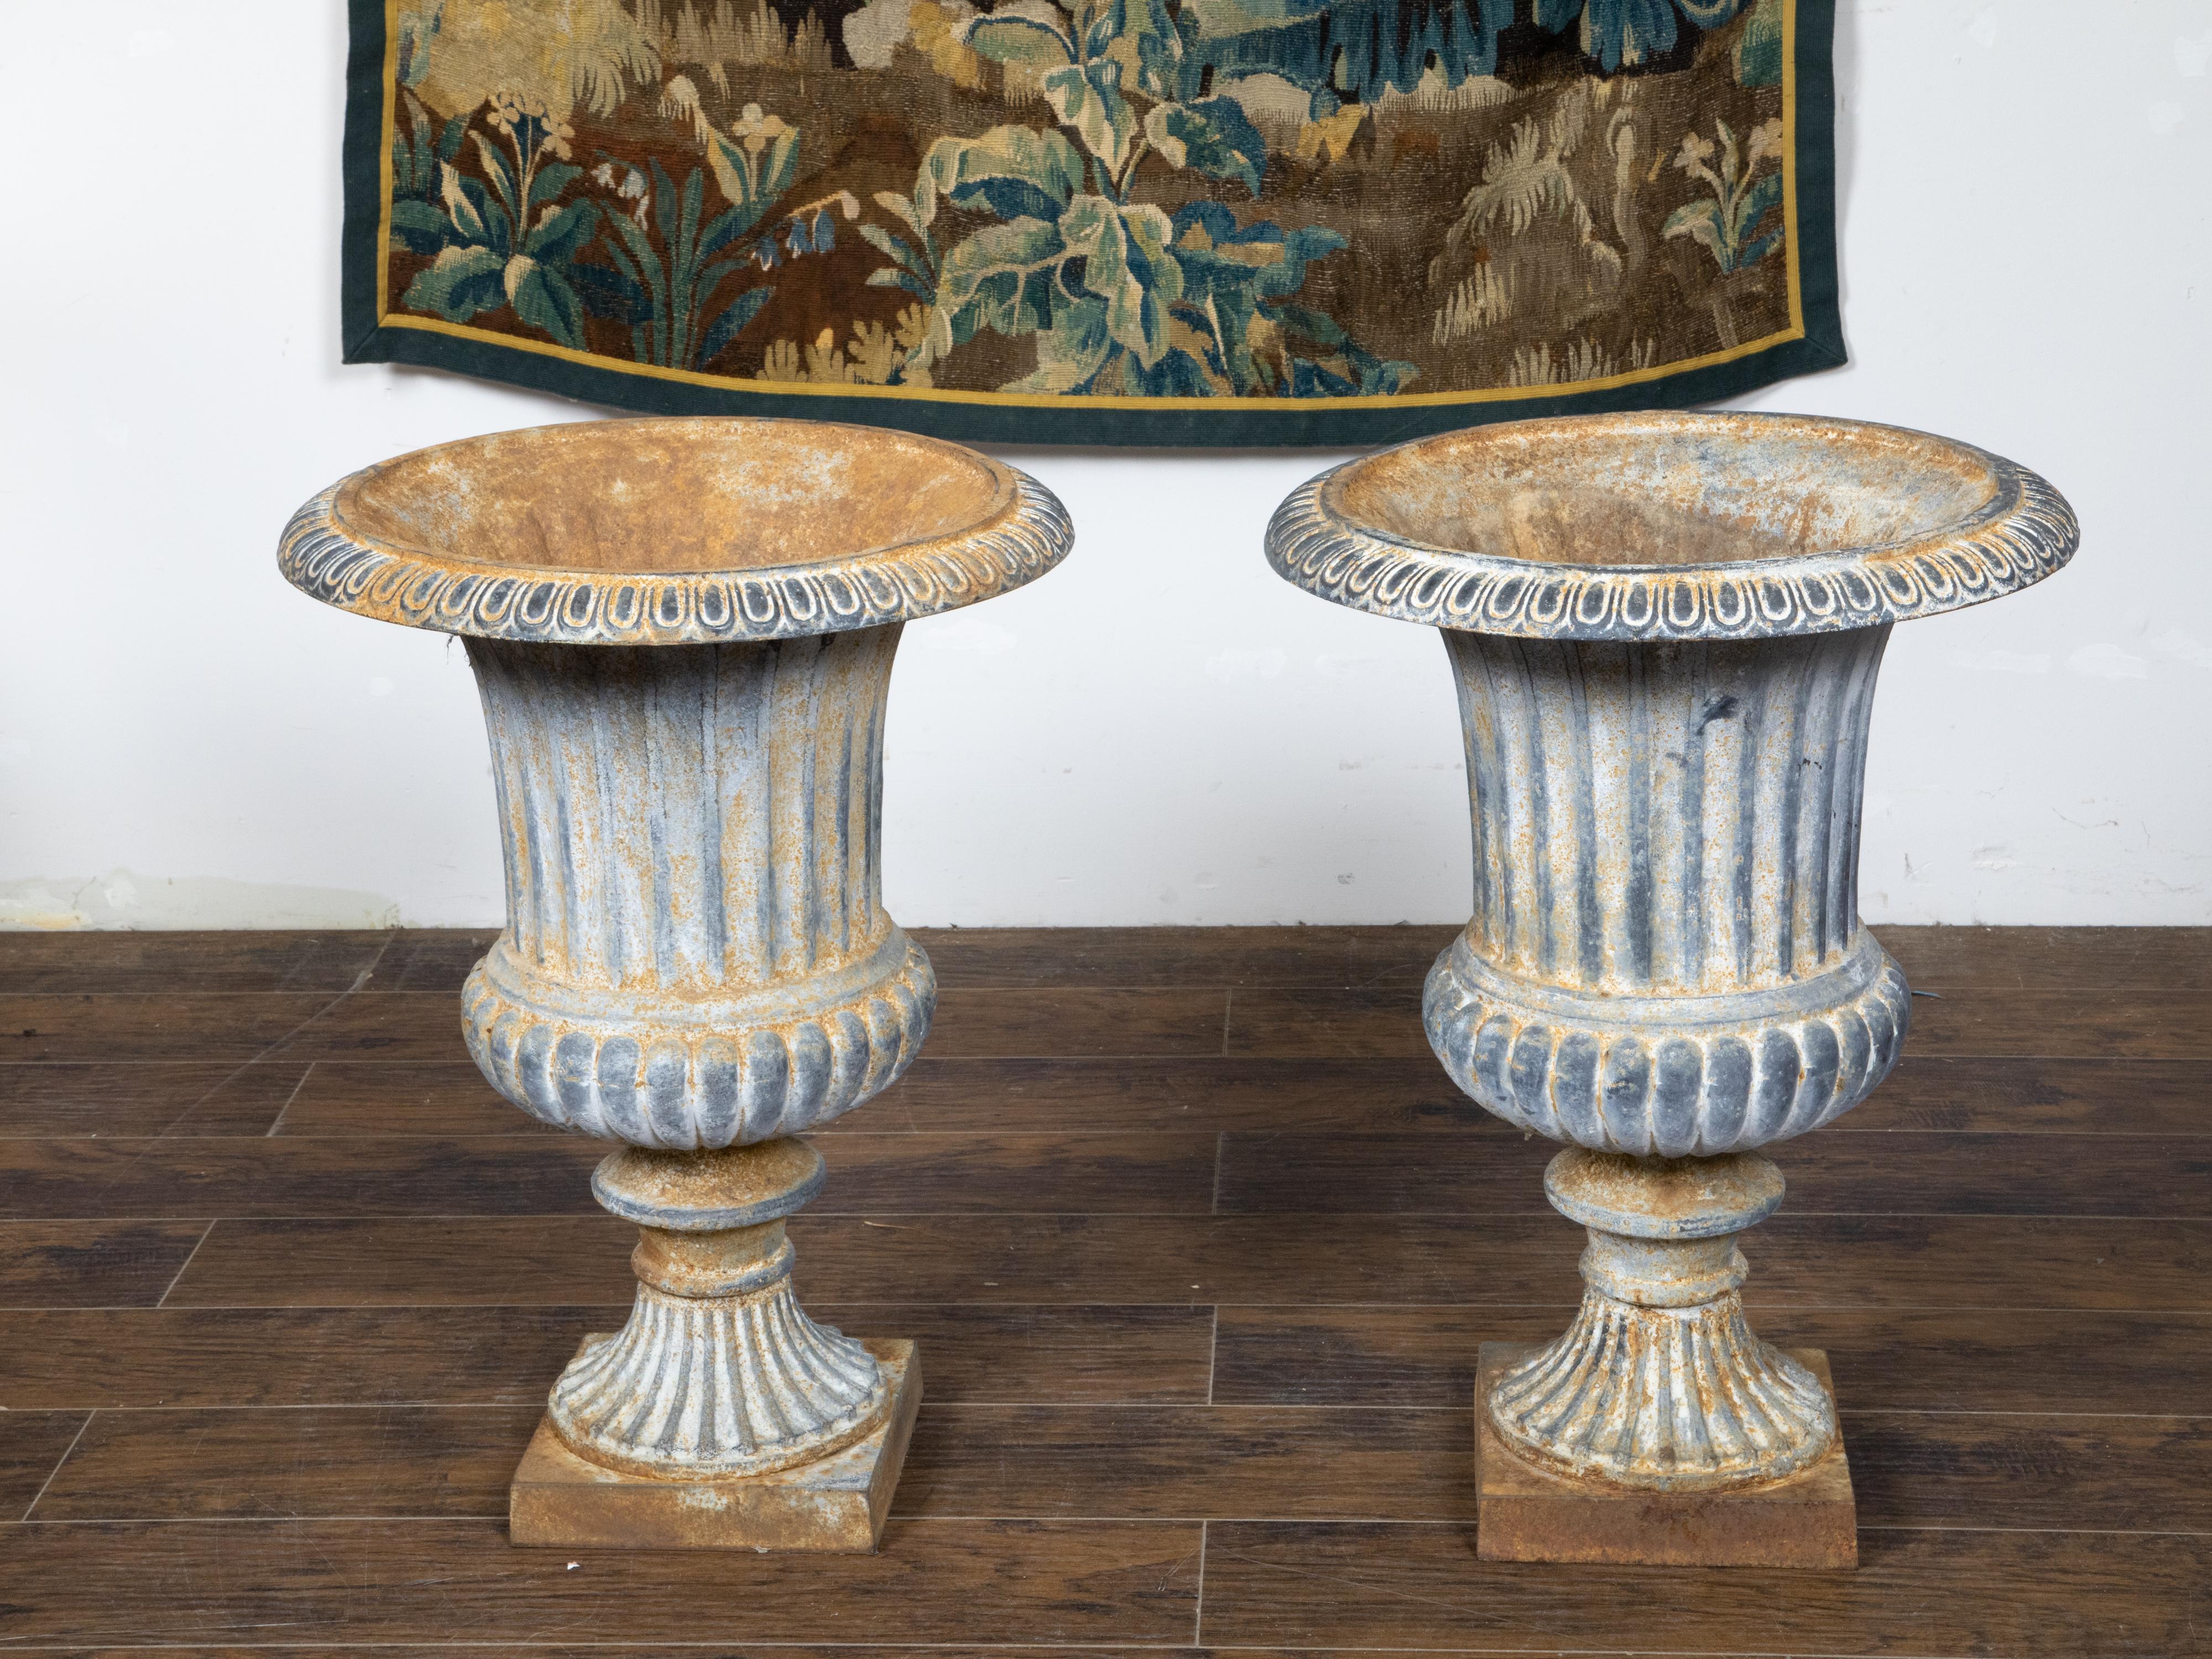 A pair of French turn of the century cast iron Medici urn planters from the early 20th century, with flaring lips, gadroon motifs, fluted bodies and square bases. Created in France at the Turn of the Century which saw the transition between the 19th